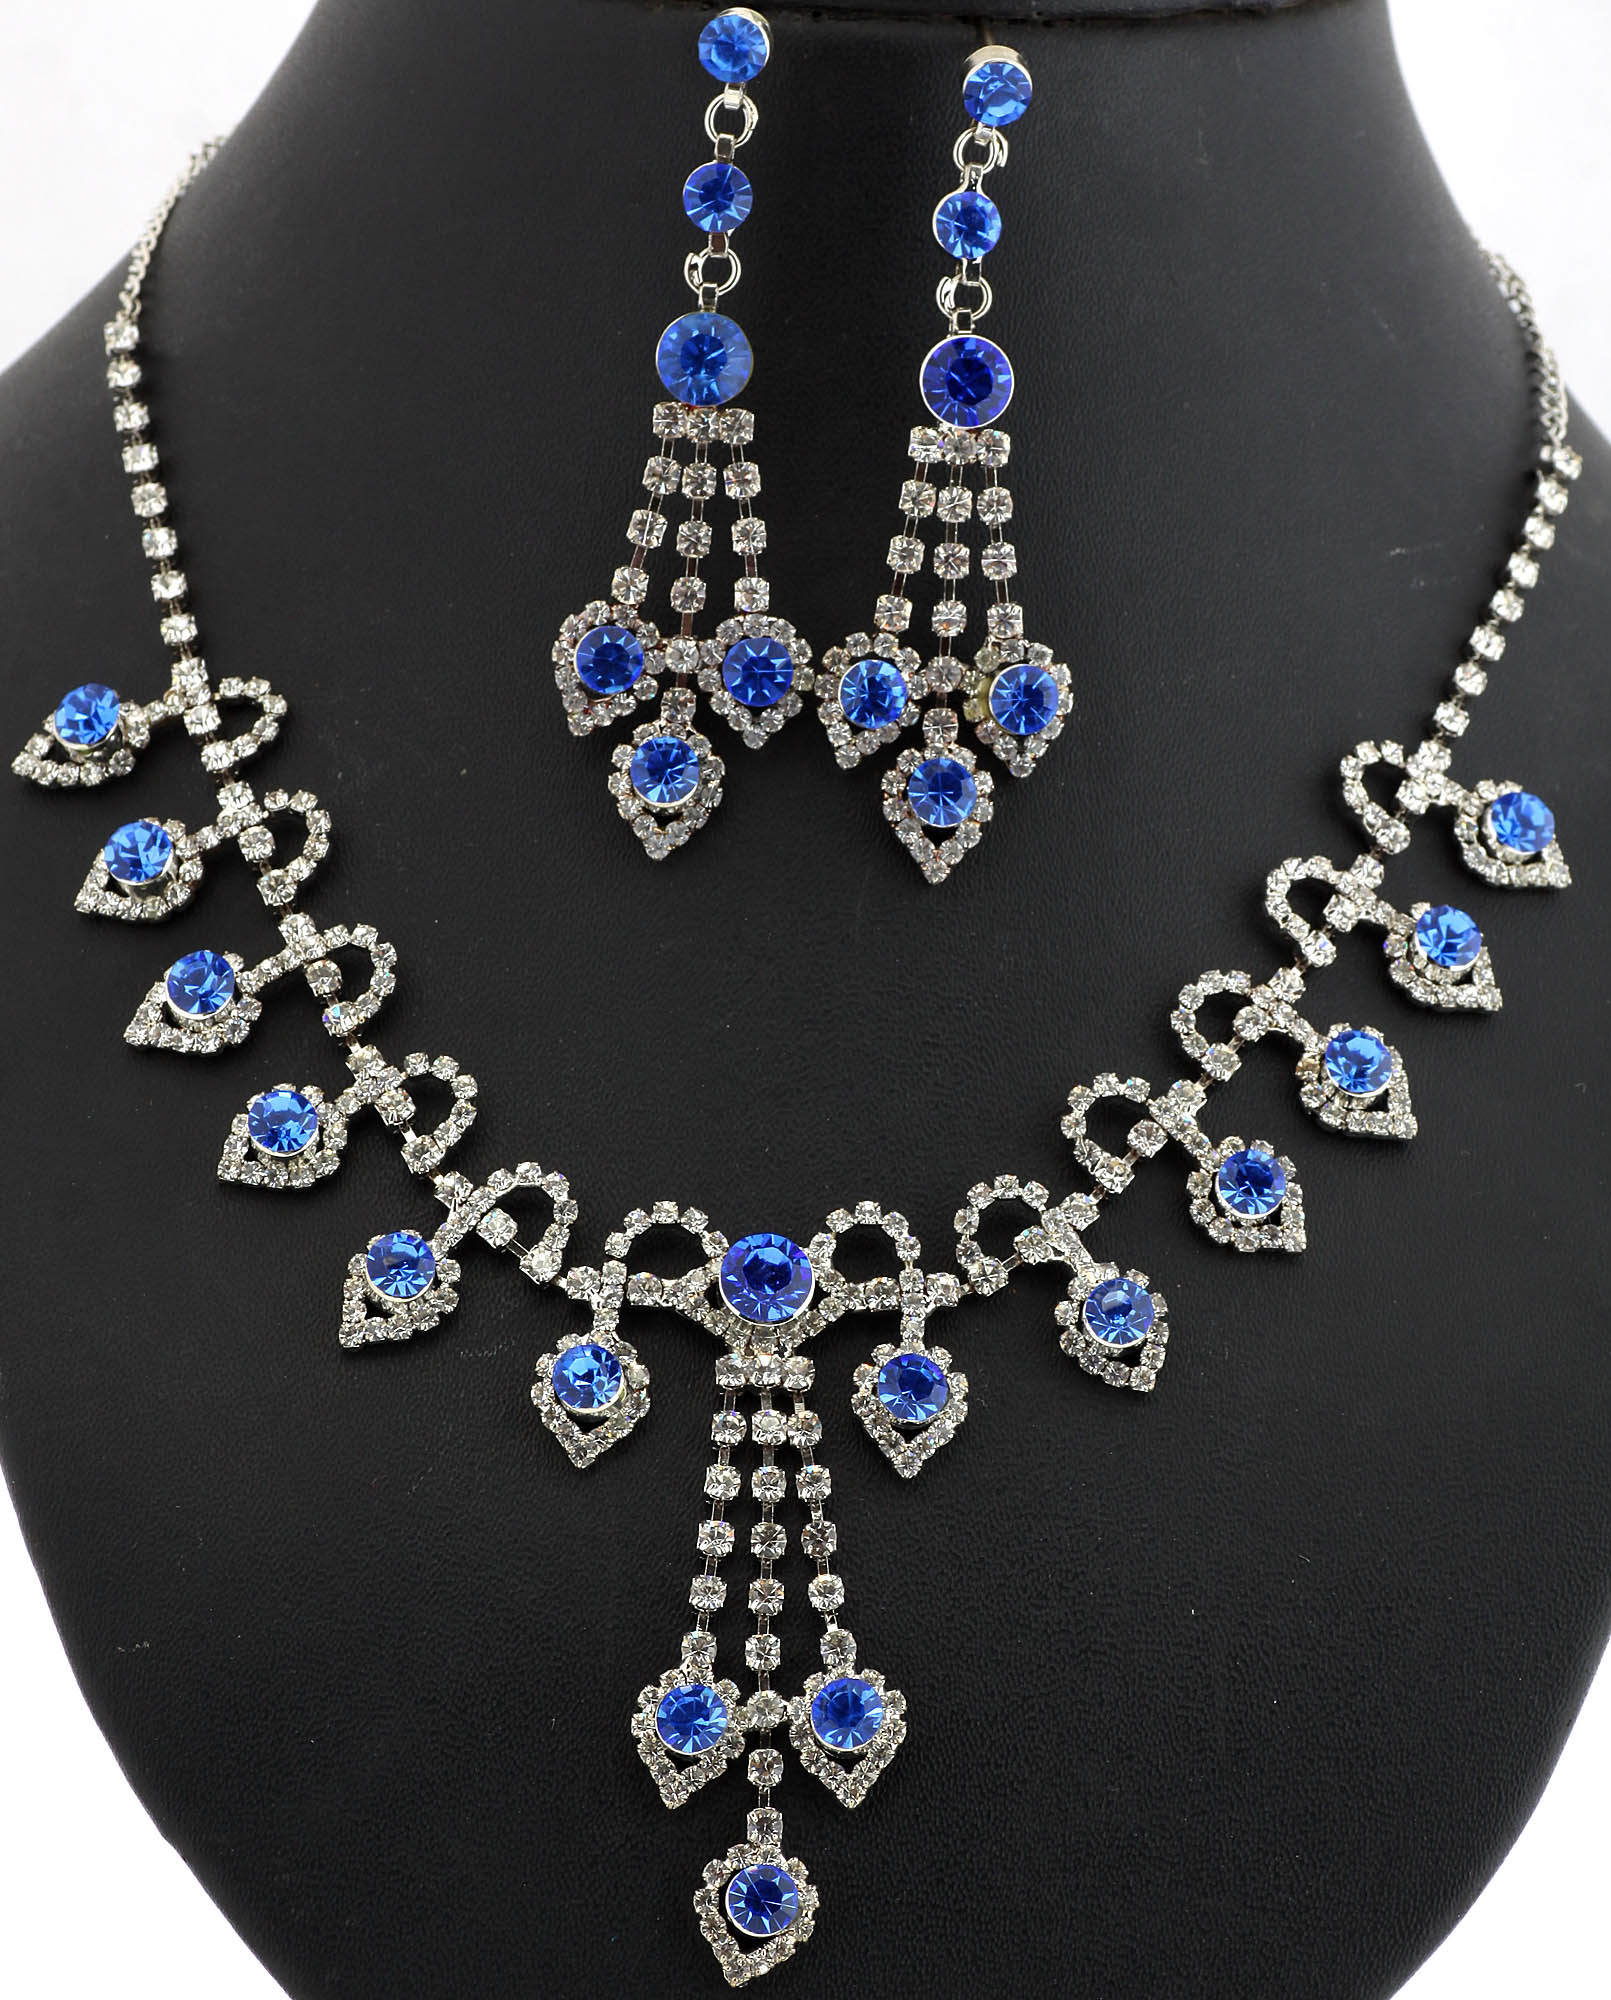 Royal-Blue Cut Glass Victorian Necklace with Earrings Set | Exotic ...